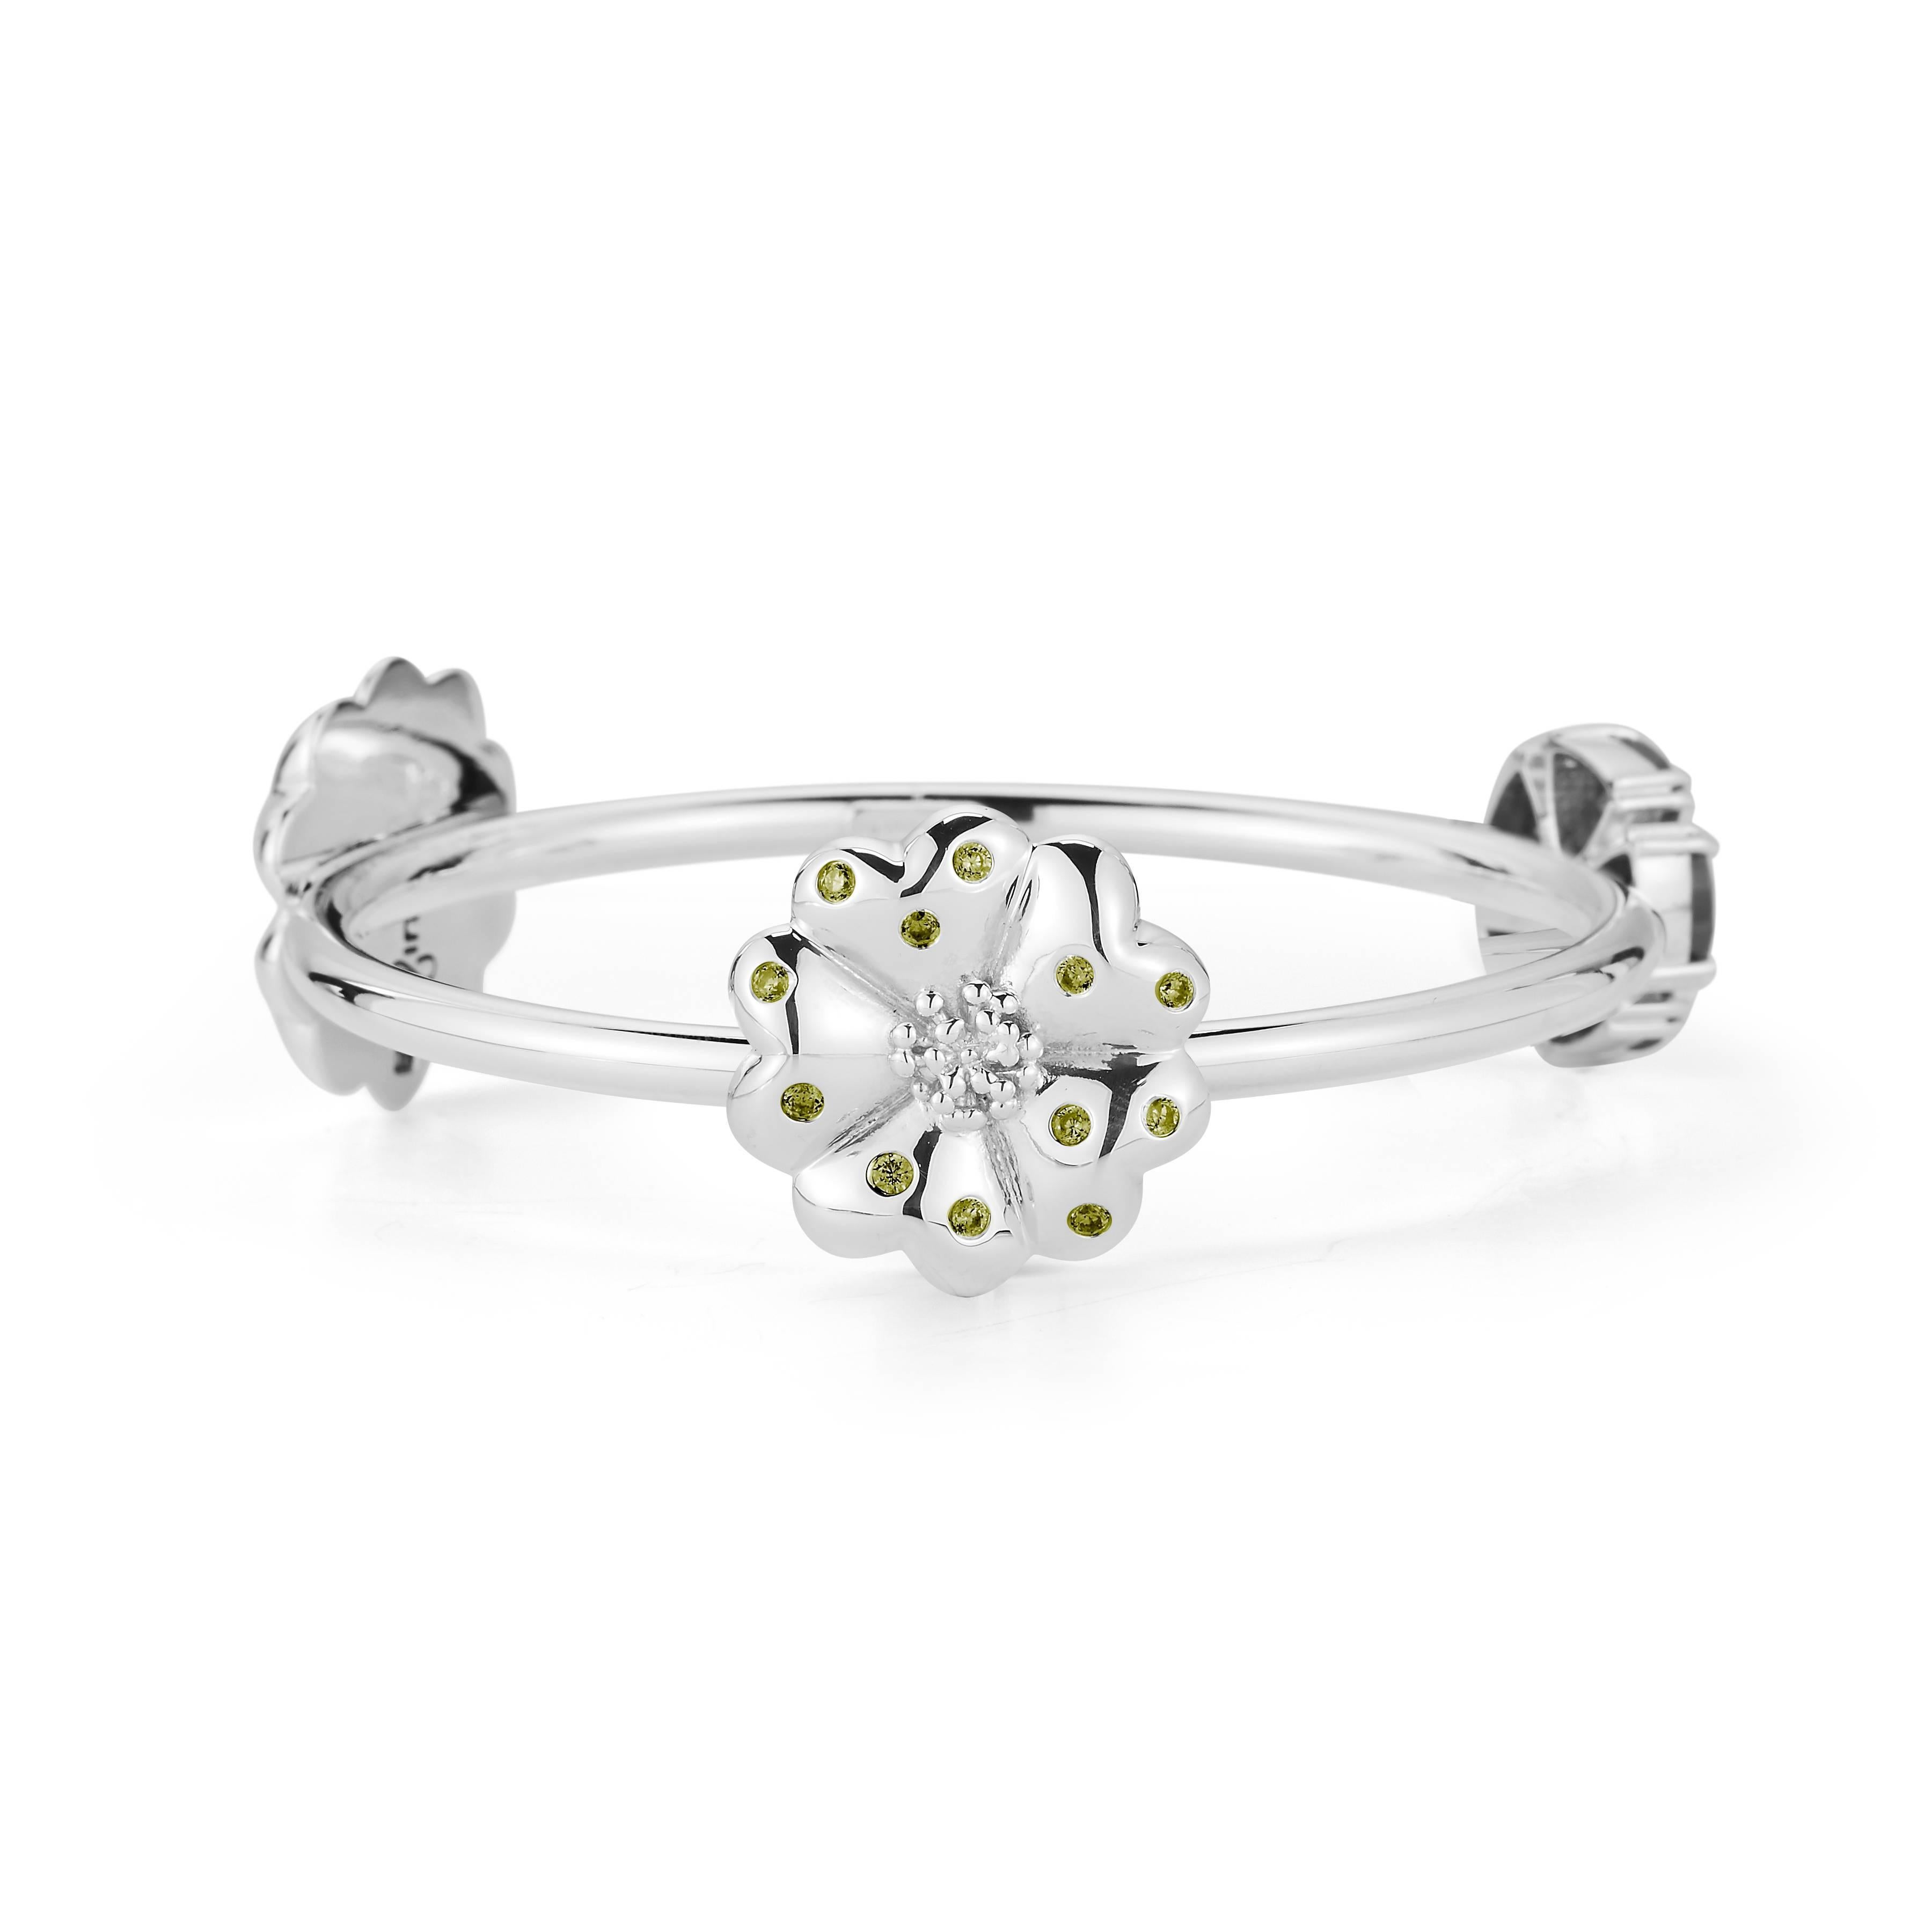 Designed in NYC

.925 Sterling Silver 5 x 7 mm Olive Peridot Mixed Blossom Stone Bangle. No matter the season, allow natural beauty to surround you wherever you go. Mixed blossom stone bangle: 

Sterling silver 
High-polish finish
Medium-weight 
3D